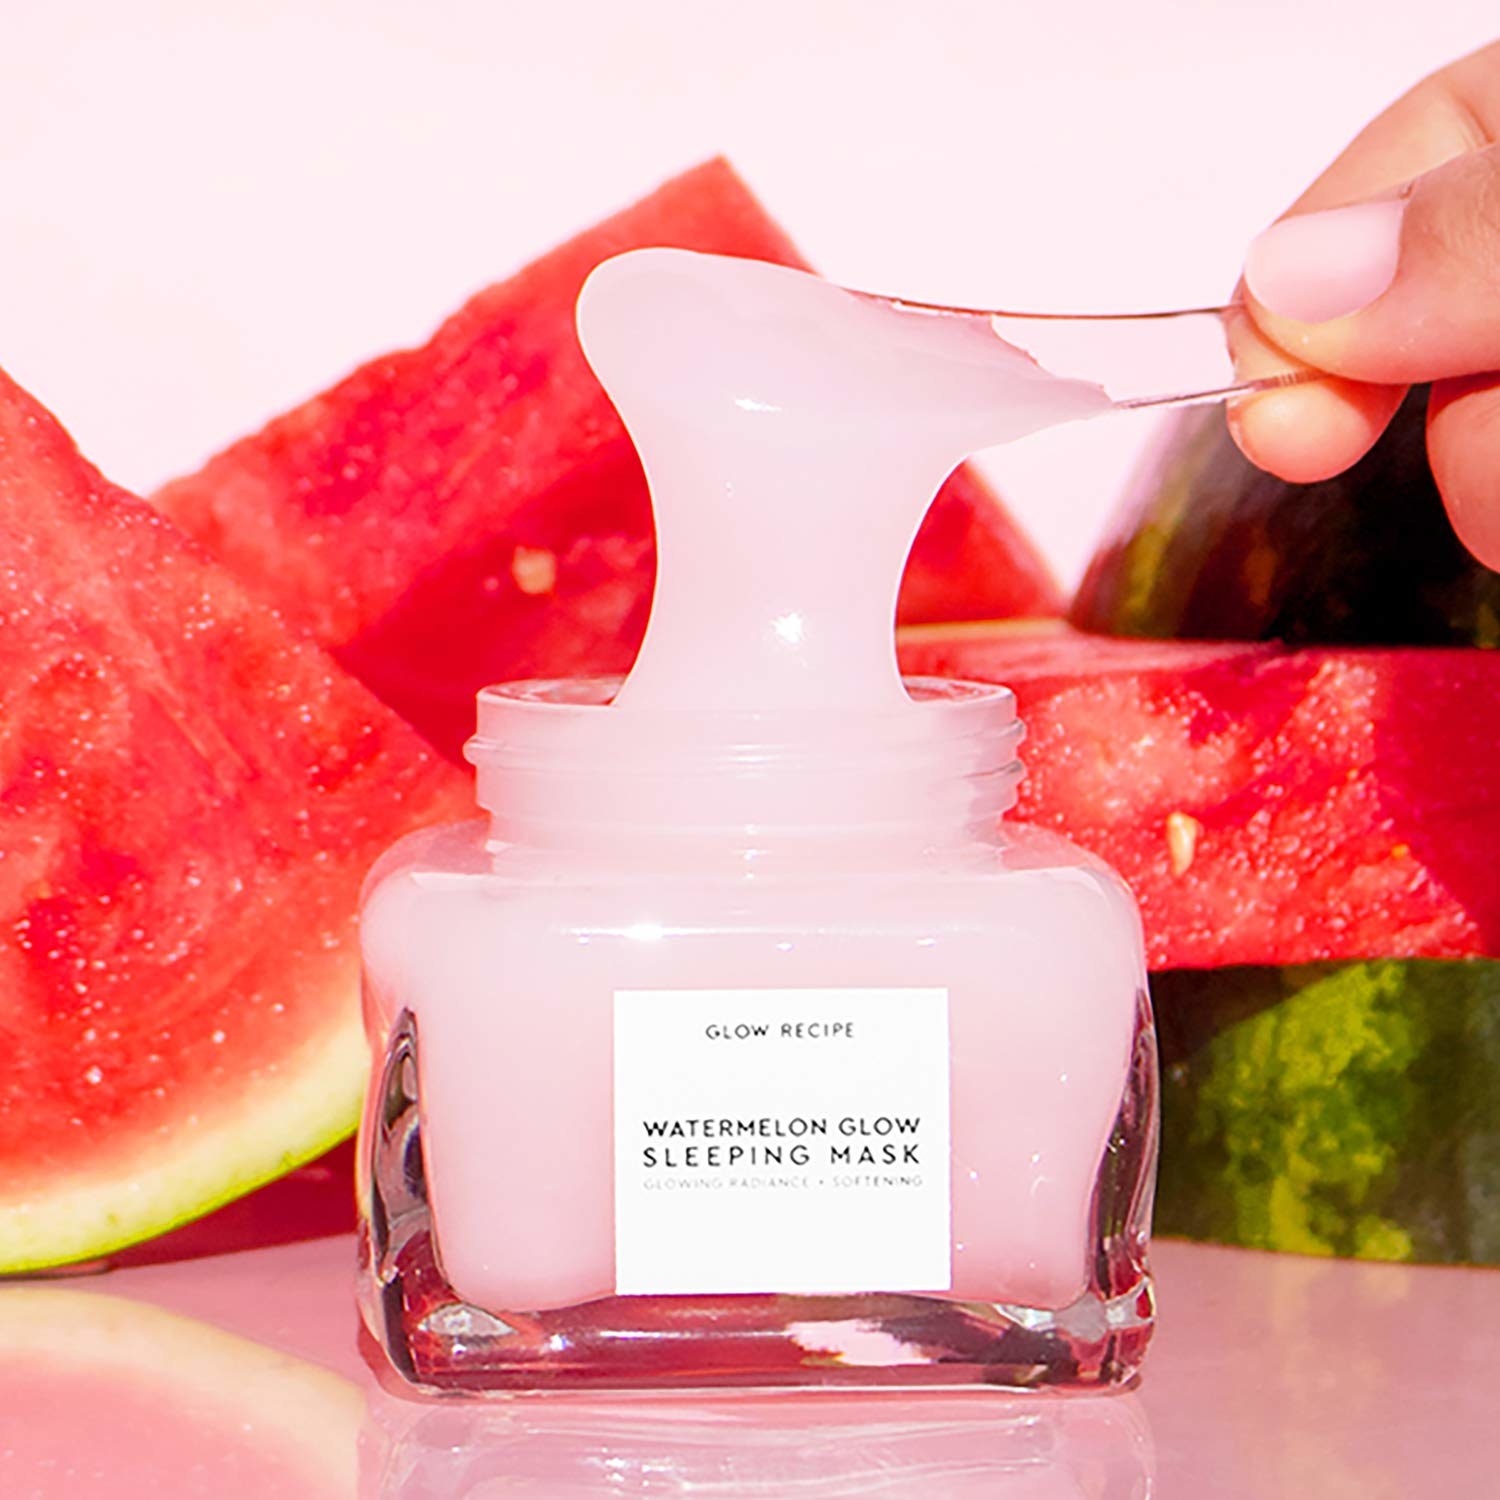 Watermelon Glow Sleeping Mask jar with a model scooping some out